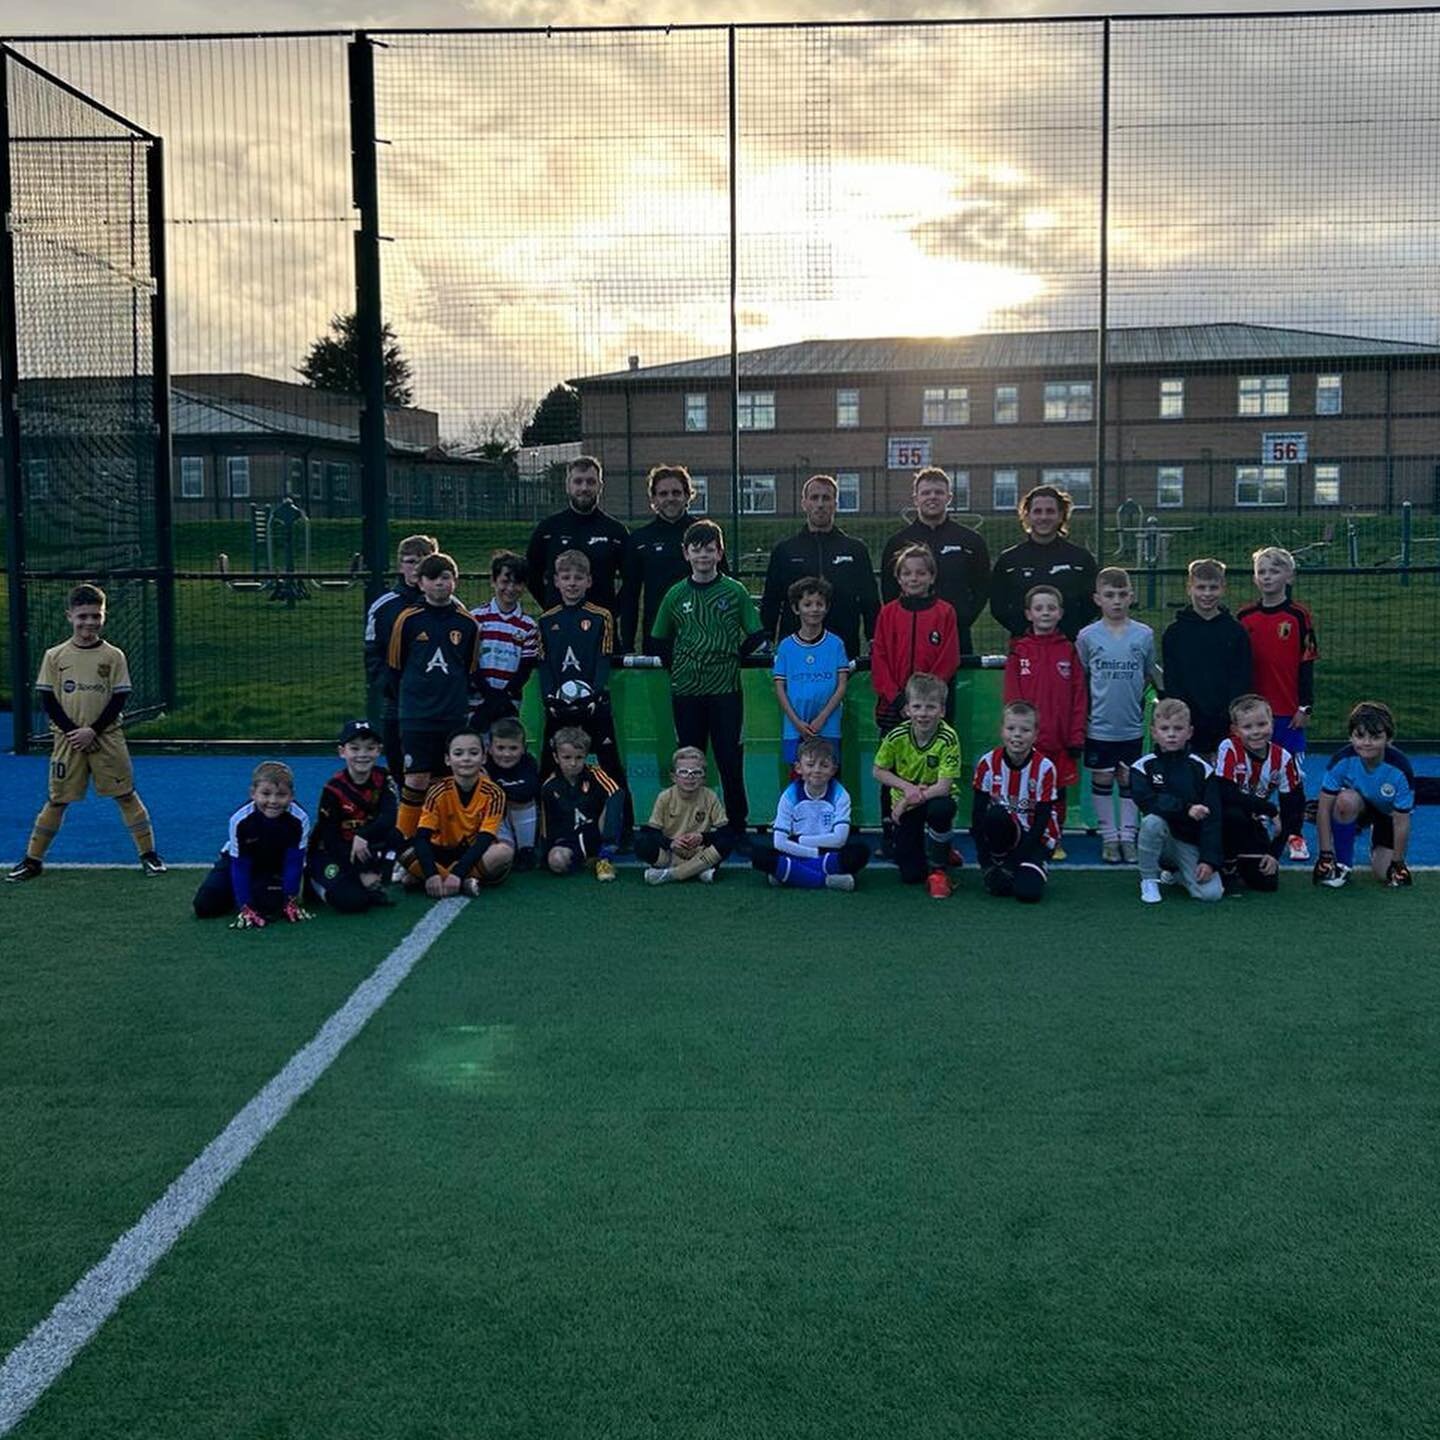 ‼️Some 📸 from this weeks training session‼️

Another great training session on Wednesday evening from all of our outfielders and goalkeepers 😁⚽️🧤

Sign up now to our monthly programme or to individual sessions👇

www.kickonacademy.com 💻📱

Contac